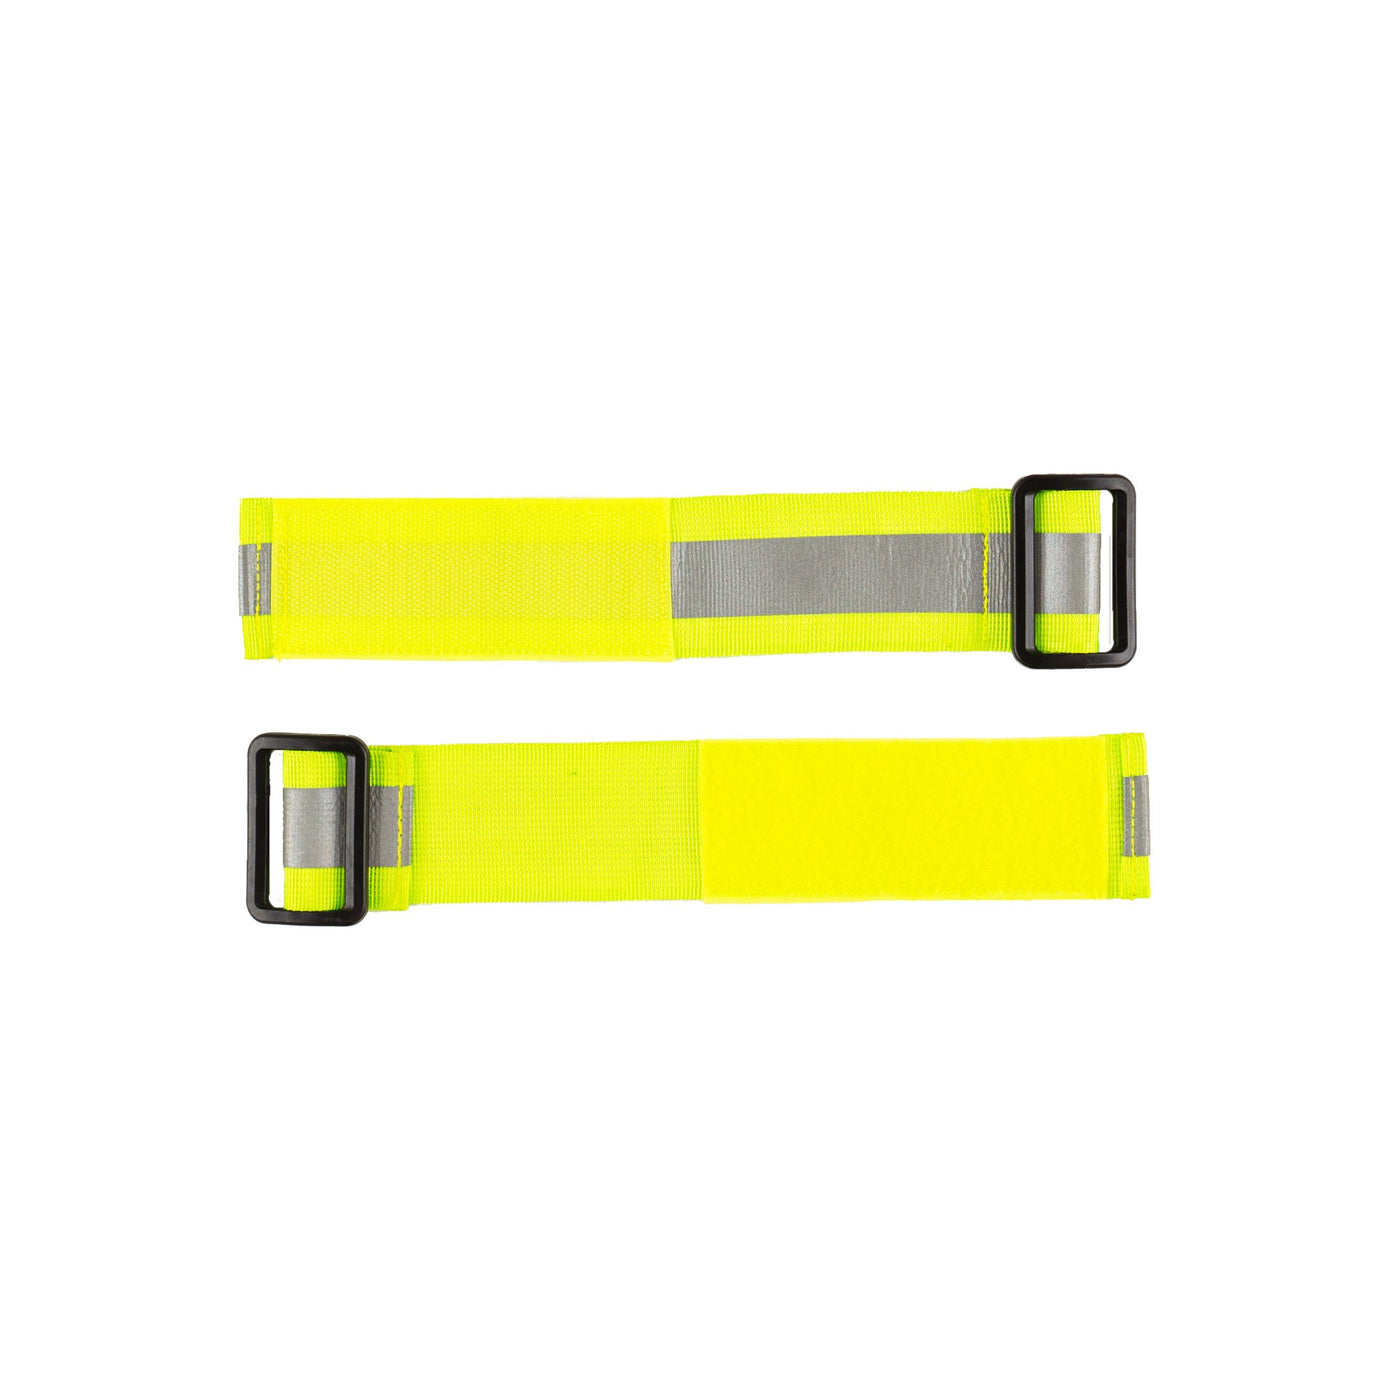 ICEVEST HiVis Safety Vest Replacement Parts